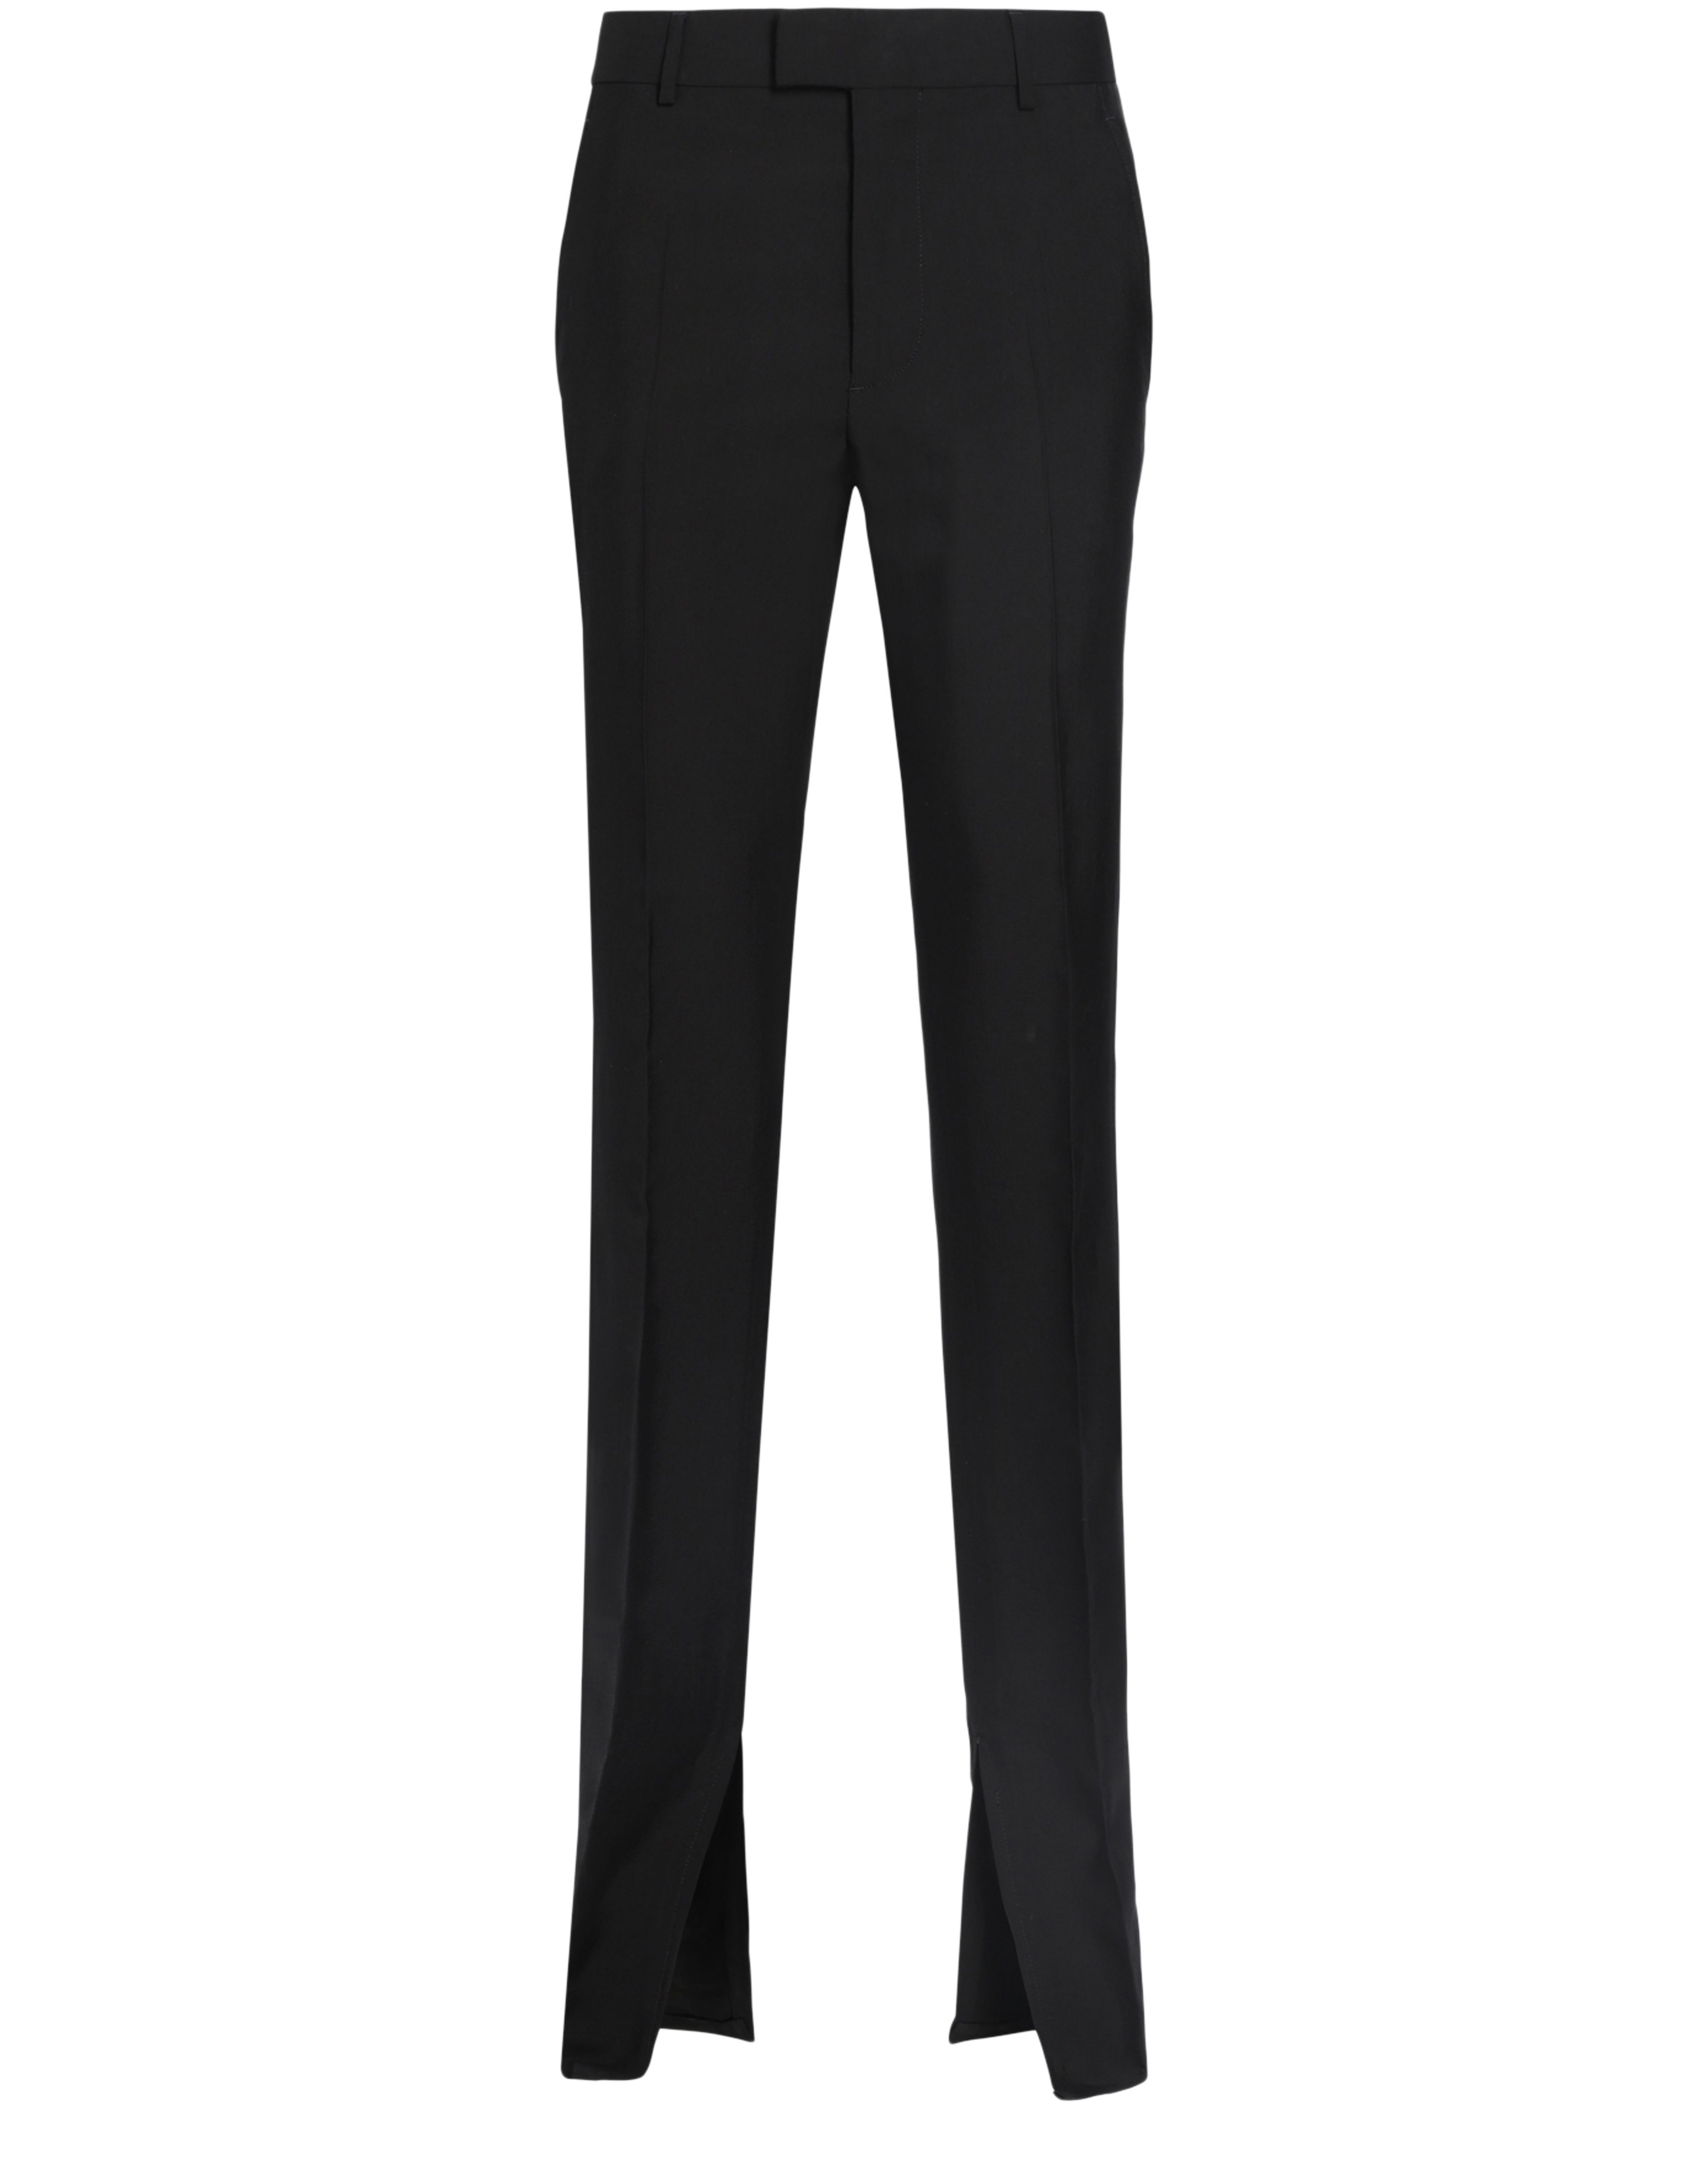 Ann Demeulemeester Delis skinny fit trousers with slit viscose calico